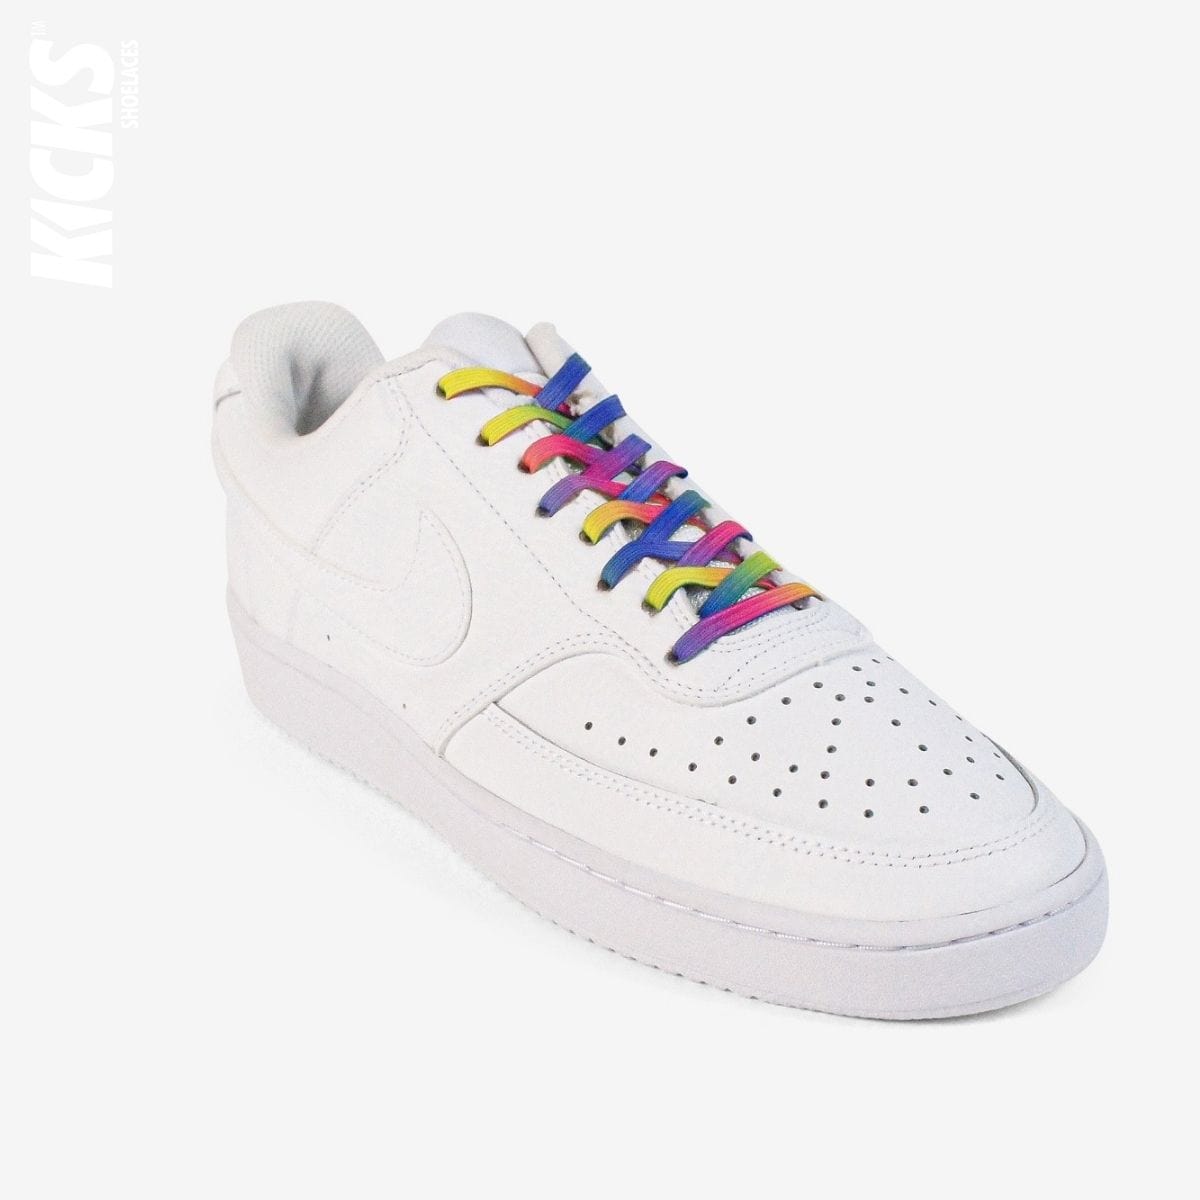 elastic-no-tie-shoelaces-with-green-ombre-lace-on-nike-white-sneakers